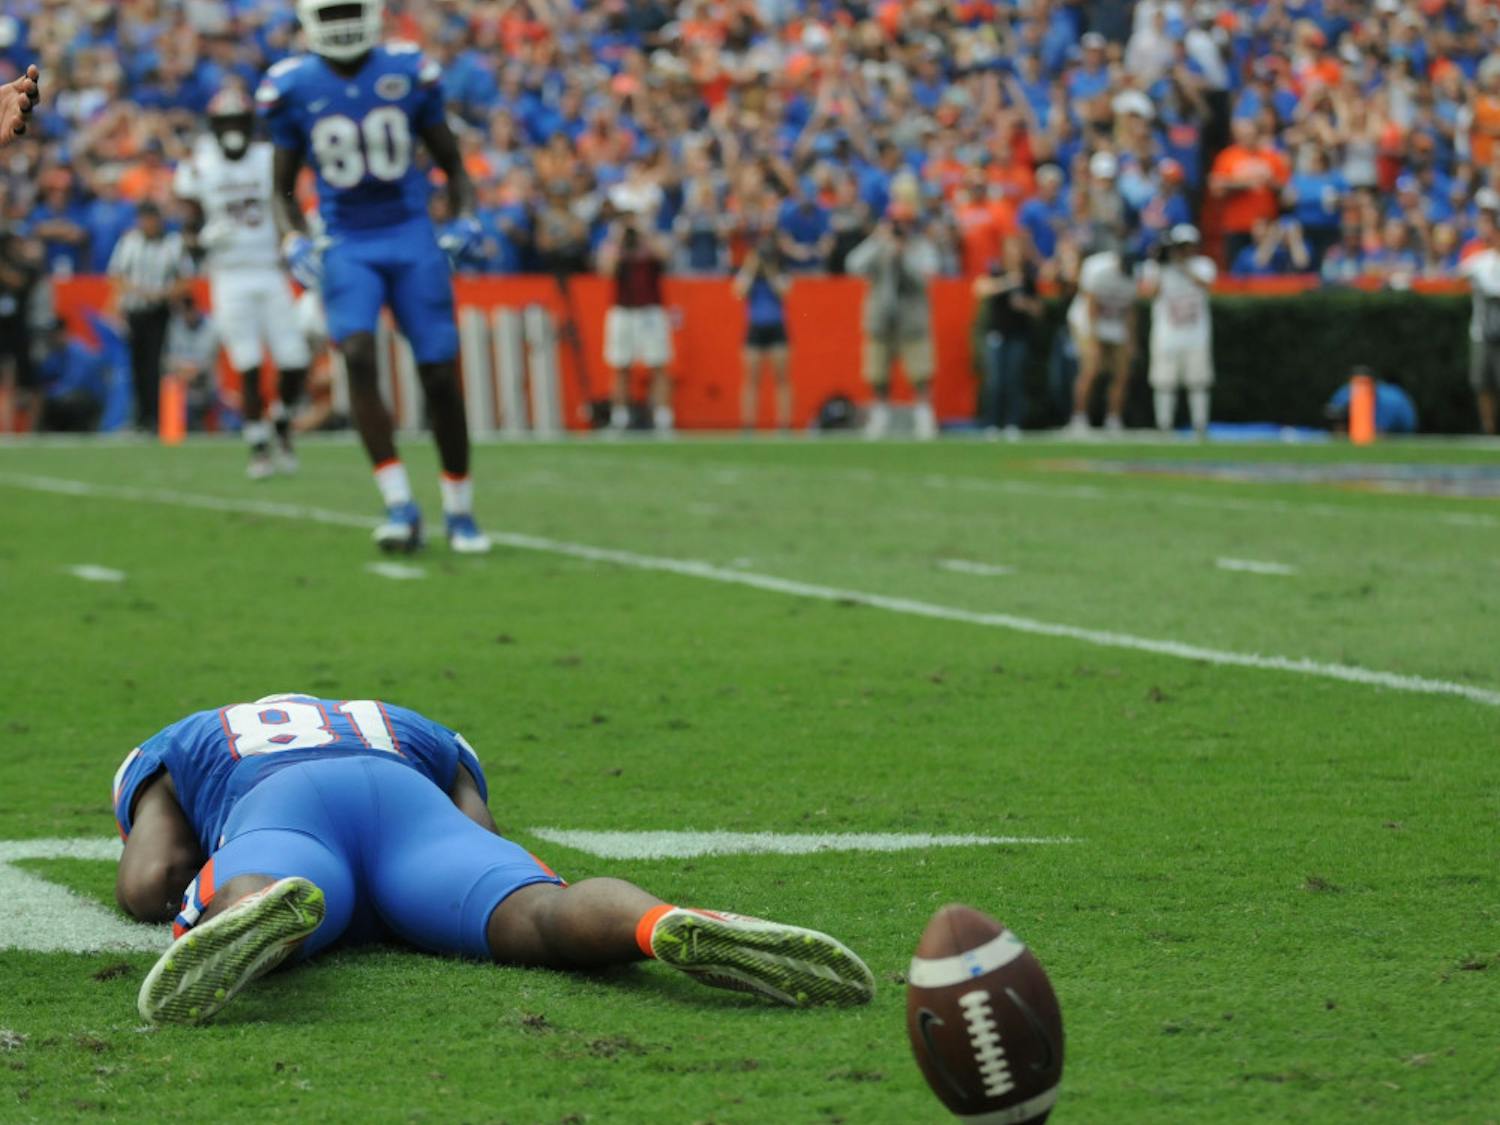 Antonio Callaway lies on the grass during Florida's win against South Carolina on Nov. 12, 2016, at Ben Hill Griffin Stadium